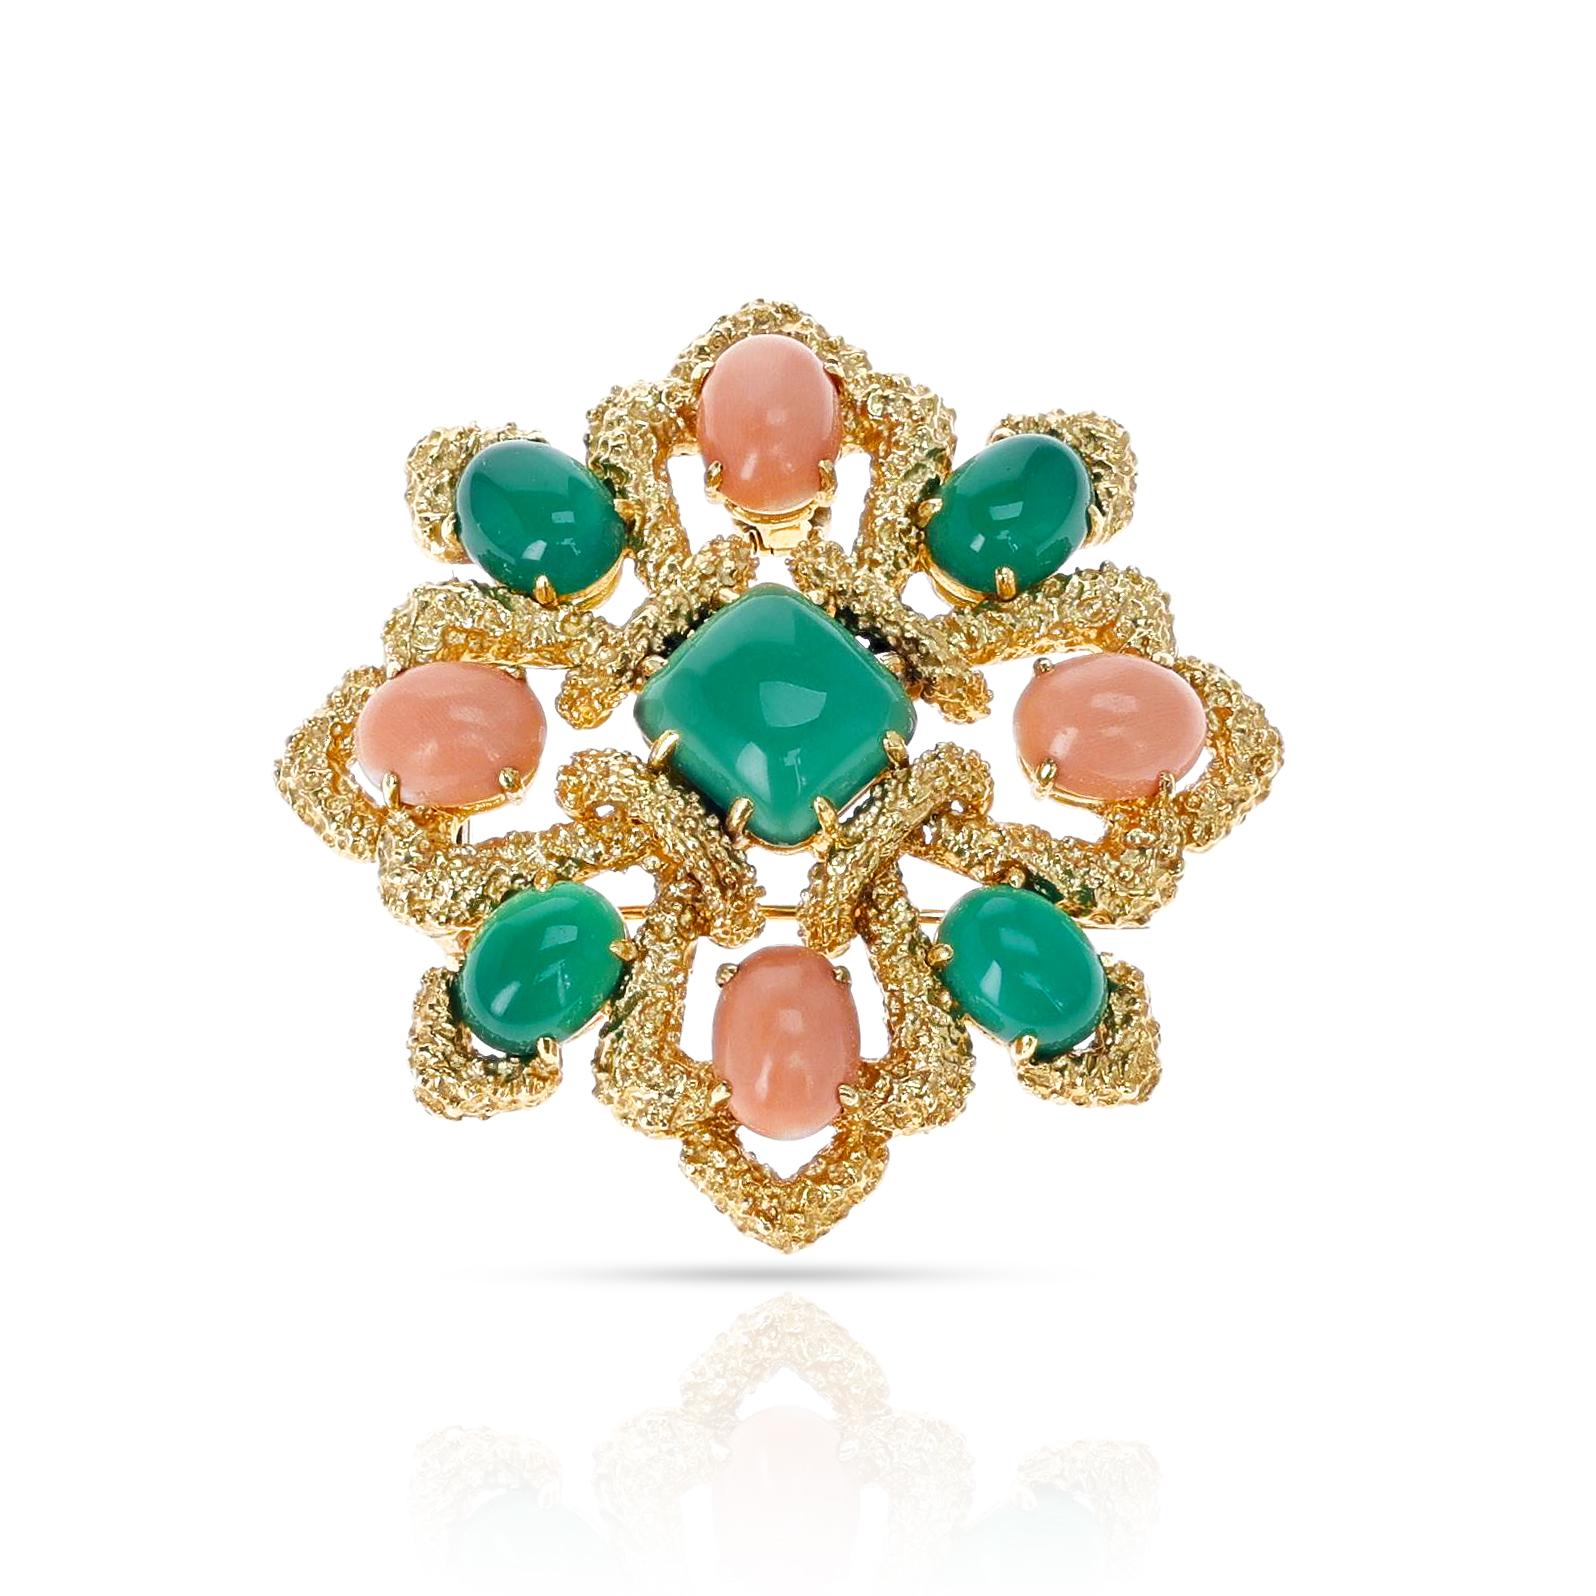 A magnificent Van Cleef & Arpels Chrysoprase and Coral Cabochon Brooch made in18K Yellow Gold. The total weight of the brooch is 61 grams.
